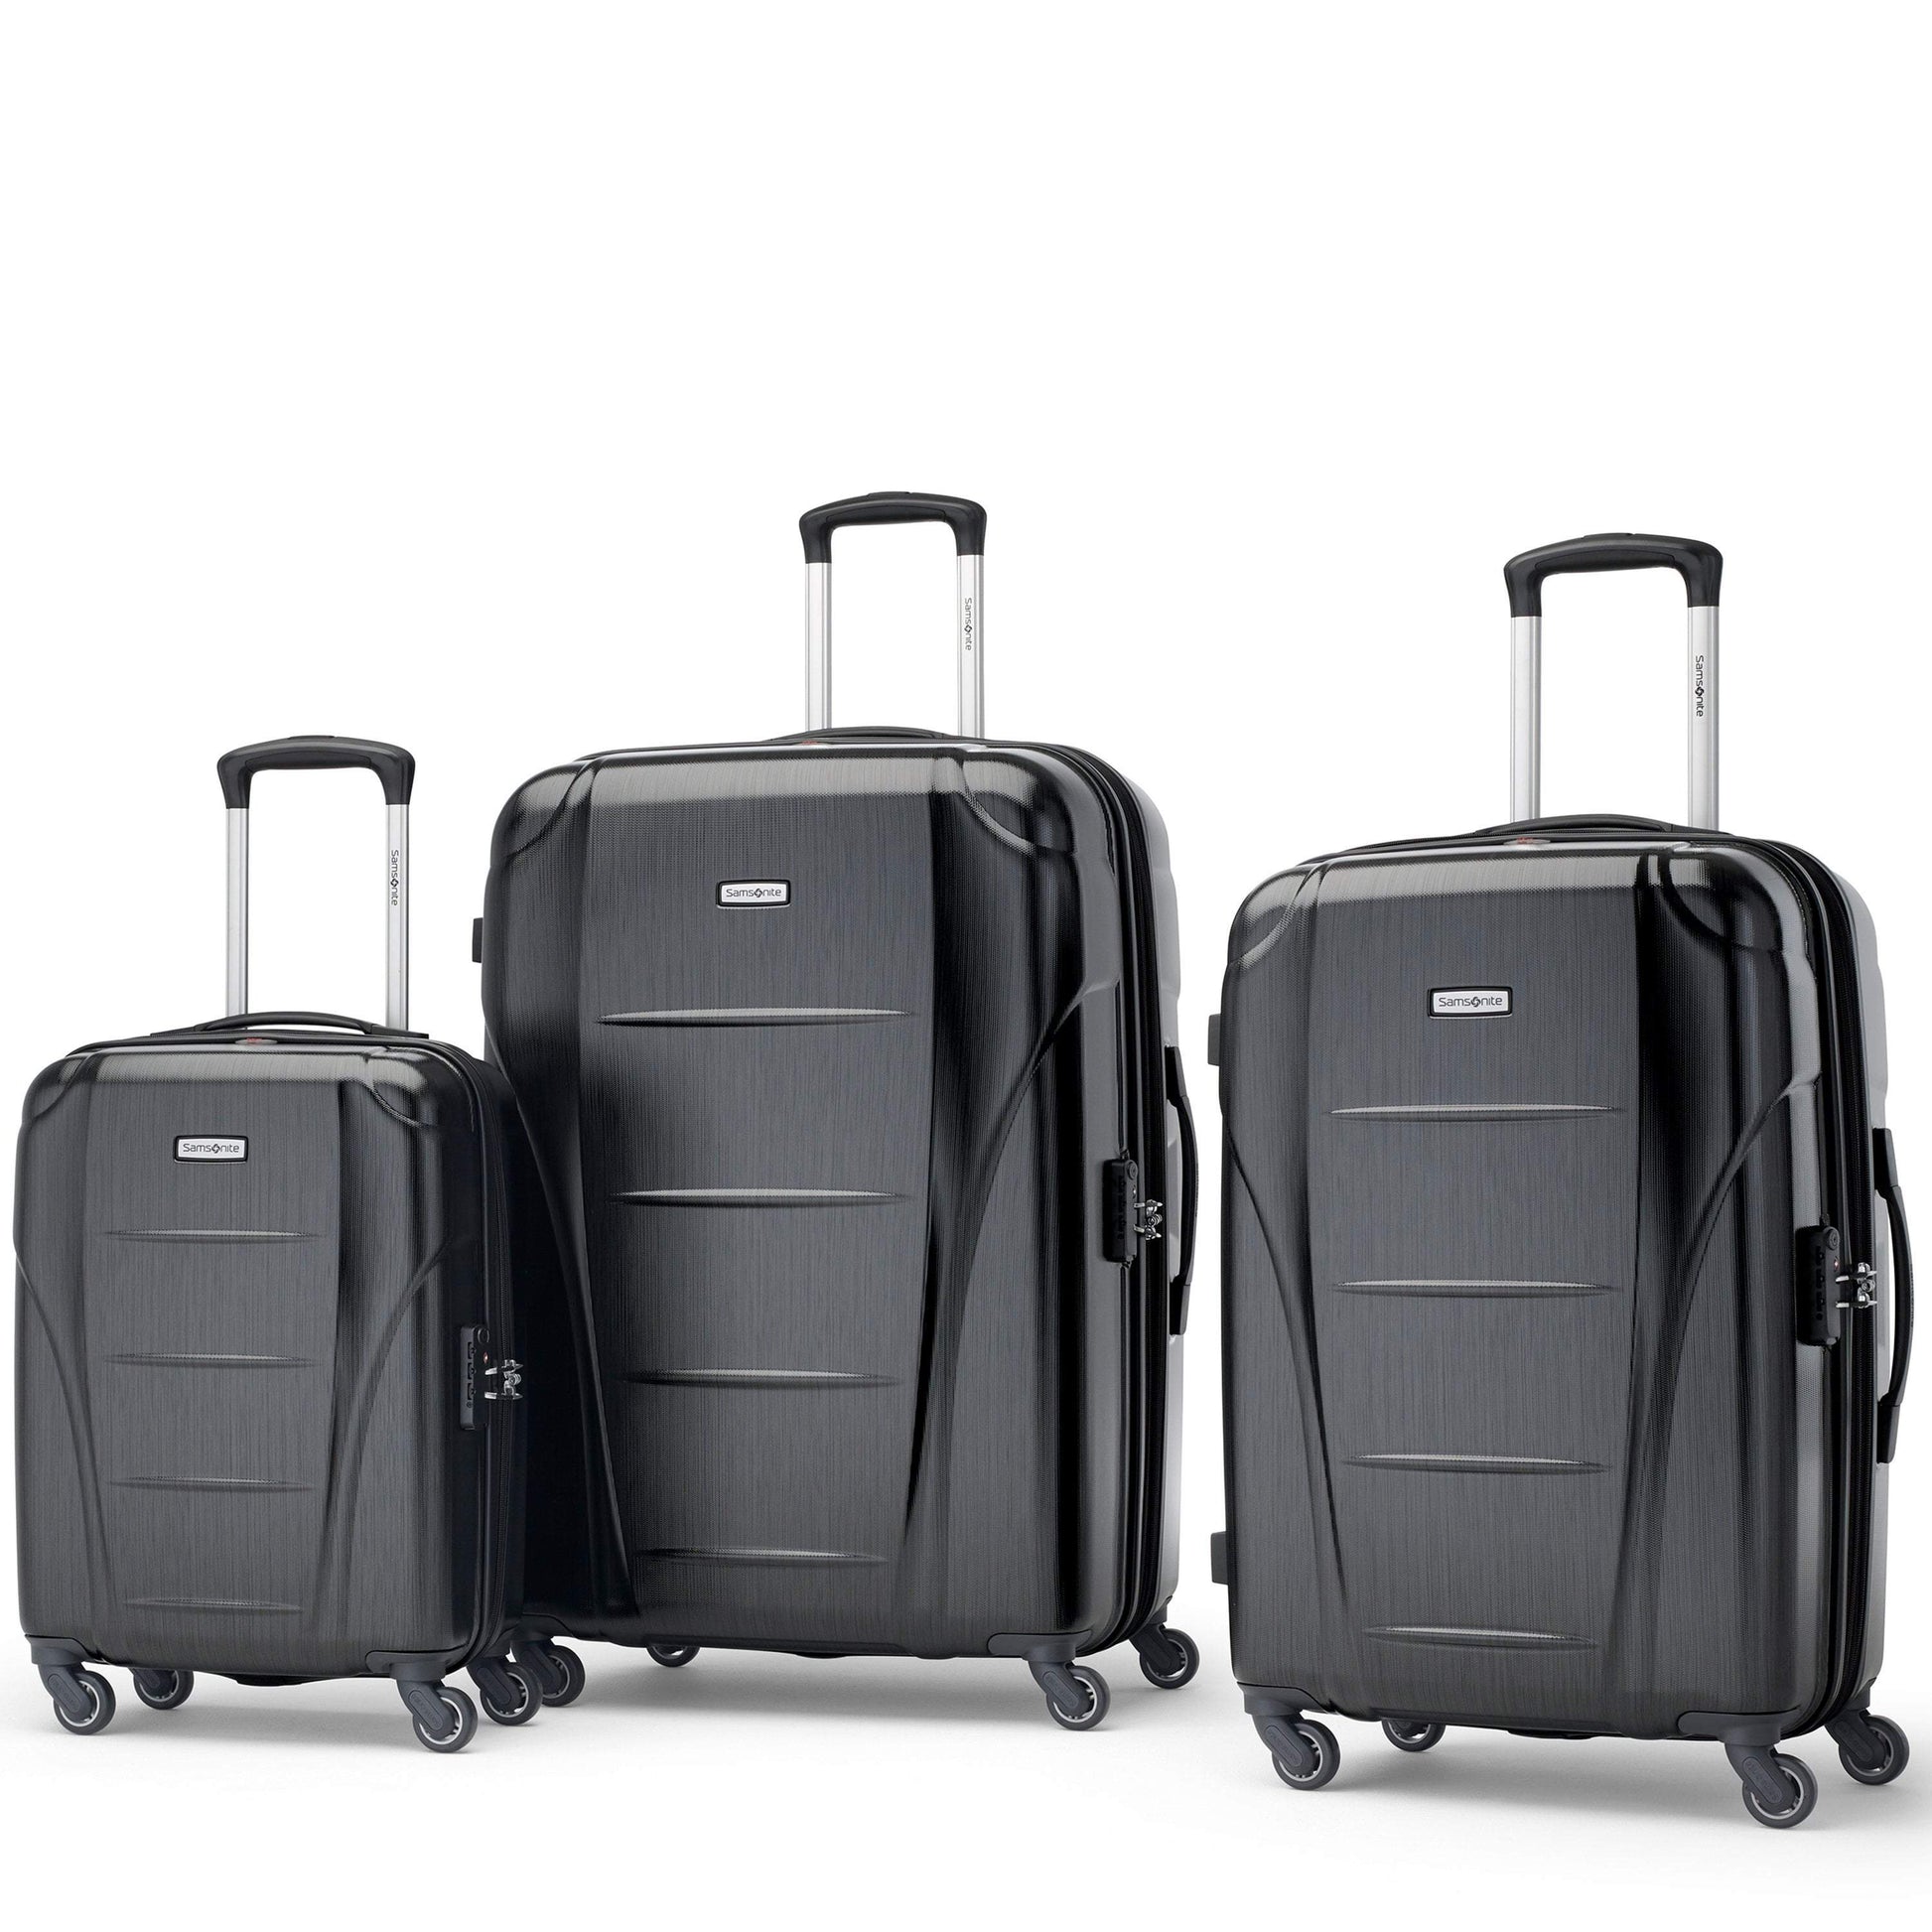 Samsonite Winfield NXT 3 Piece Spinner Expandable Luggage Set - Brushed Black